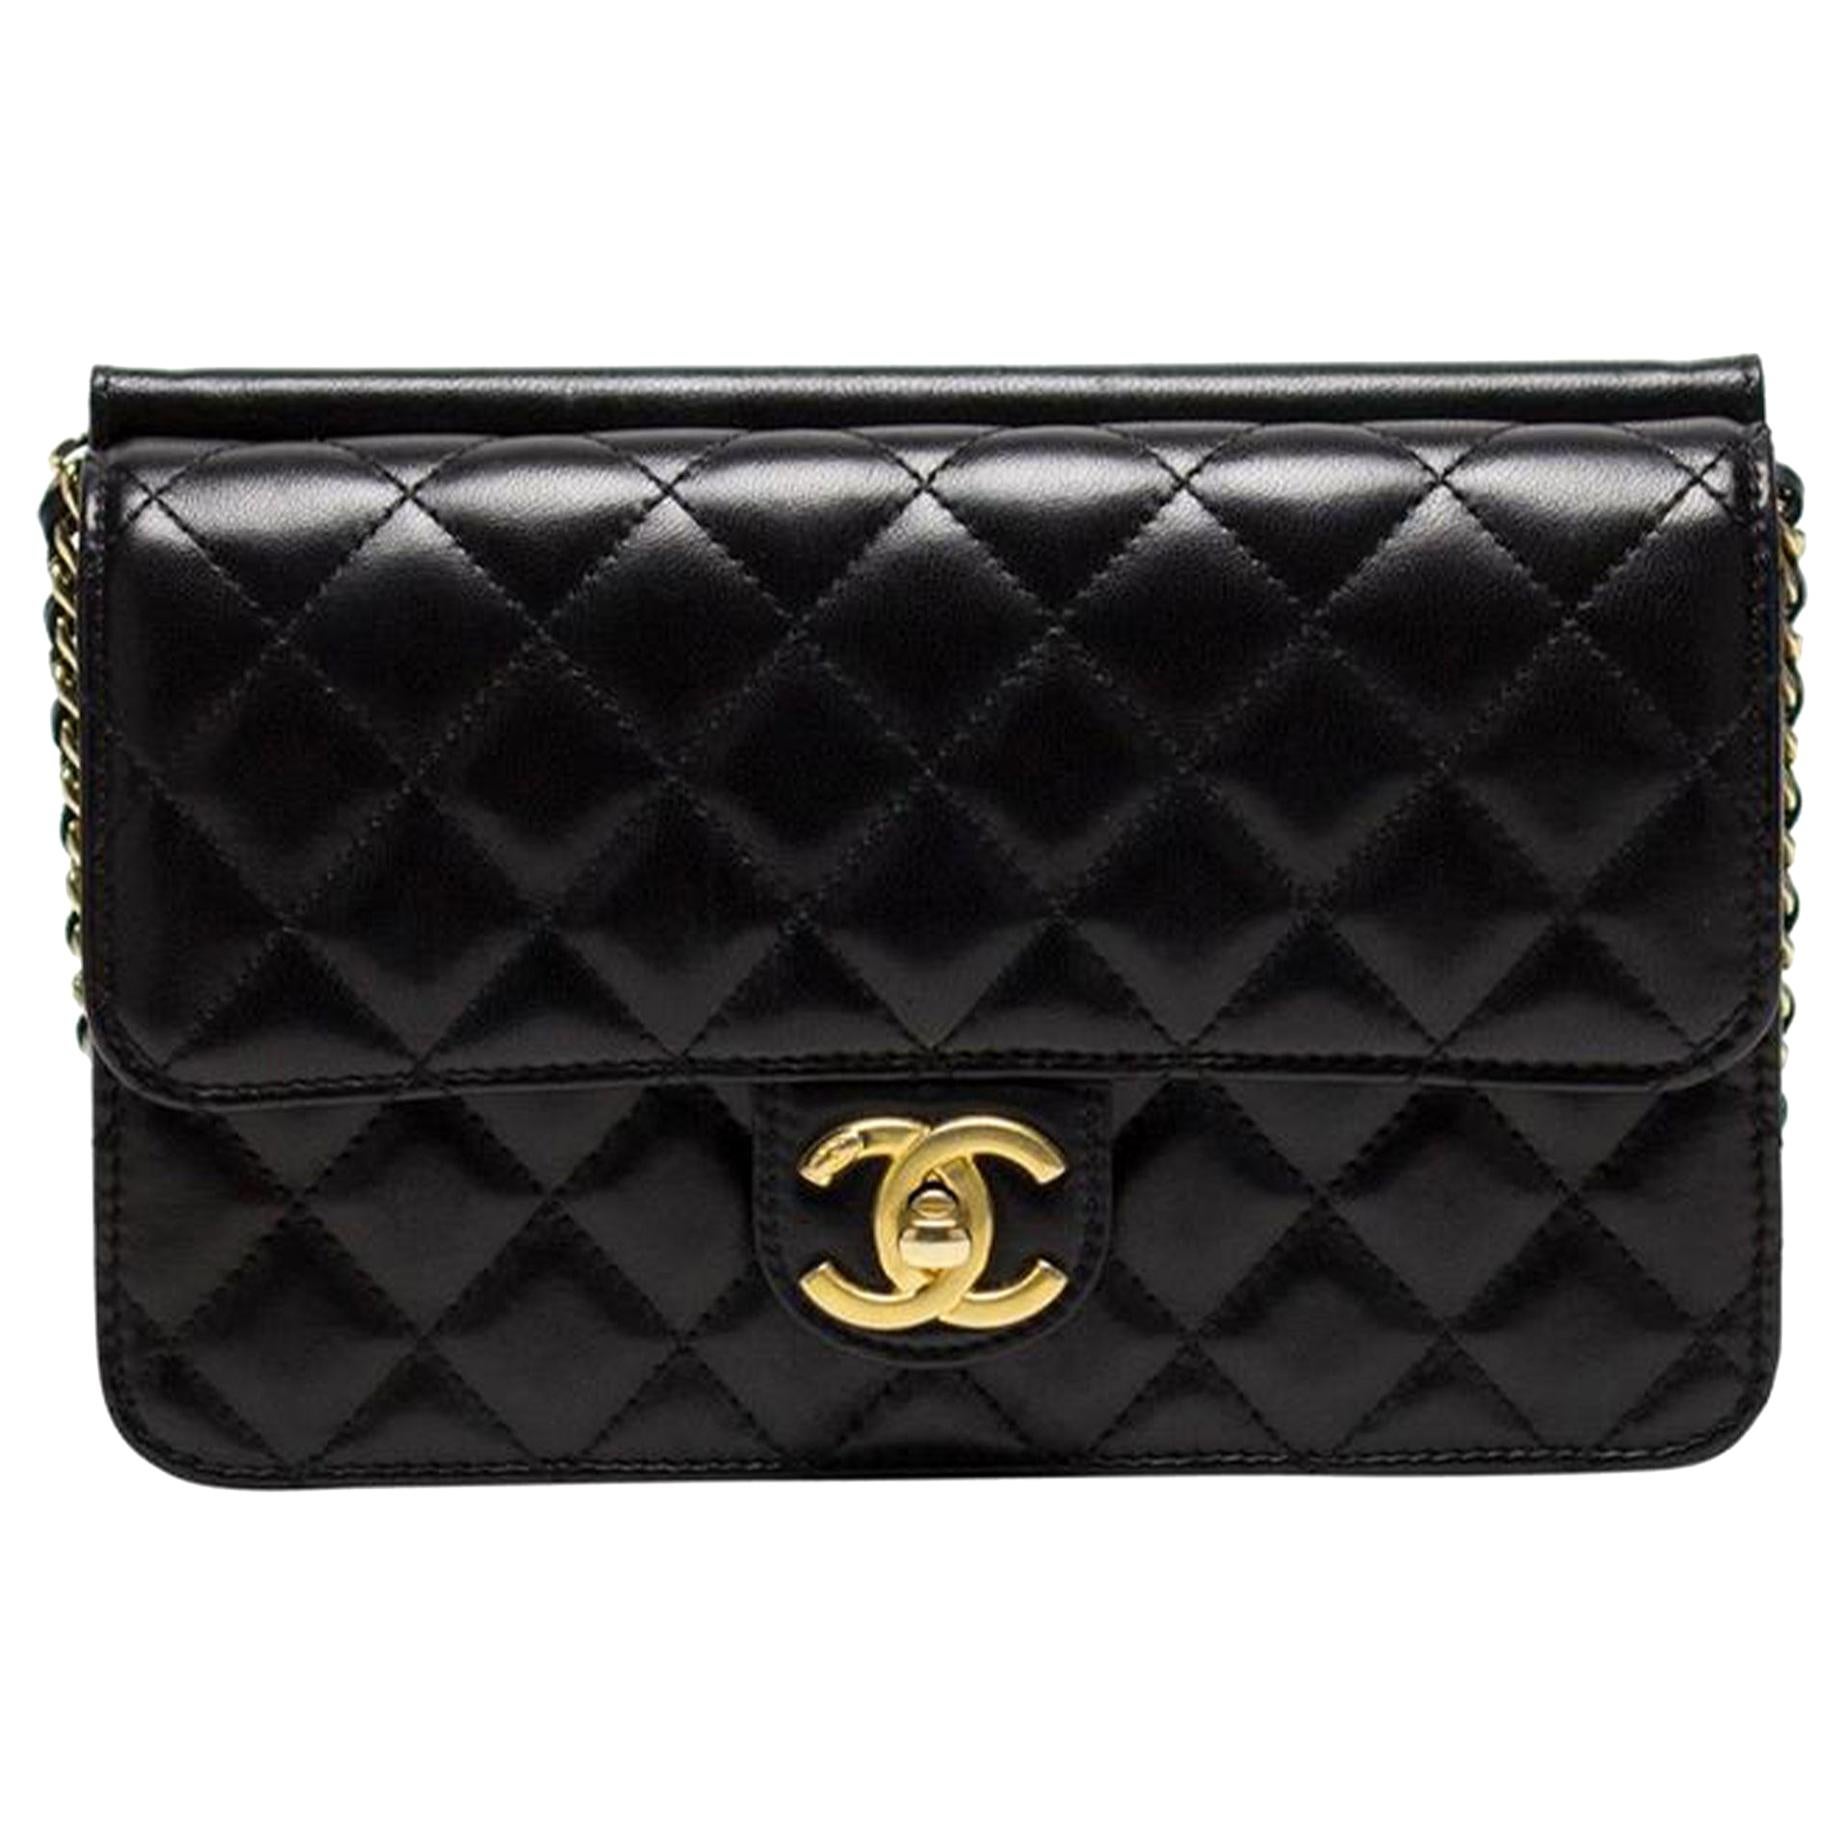 What is the best place that offers Chanel handbags for sale online  Quora